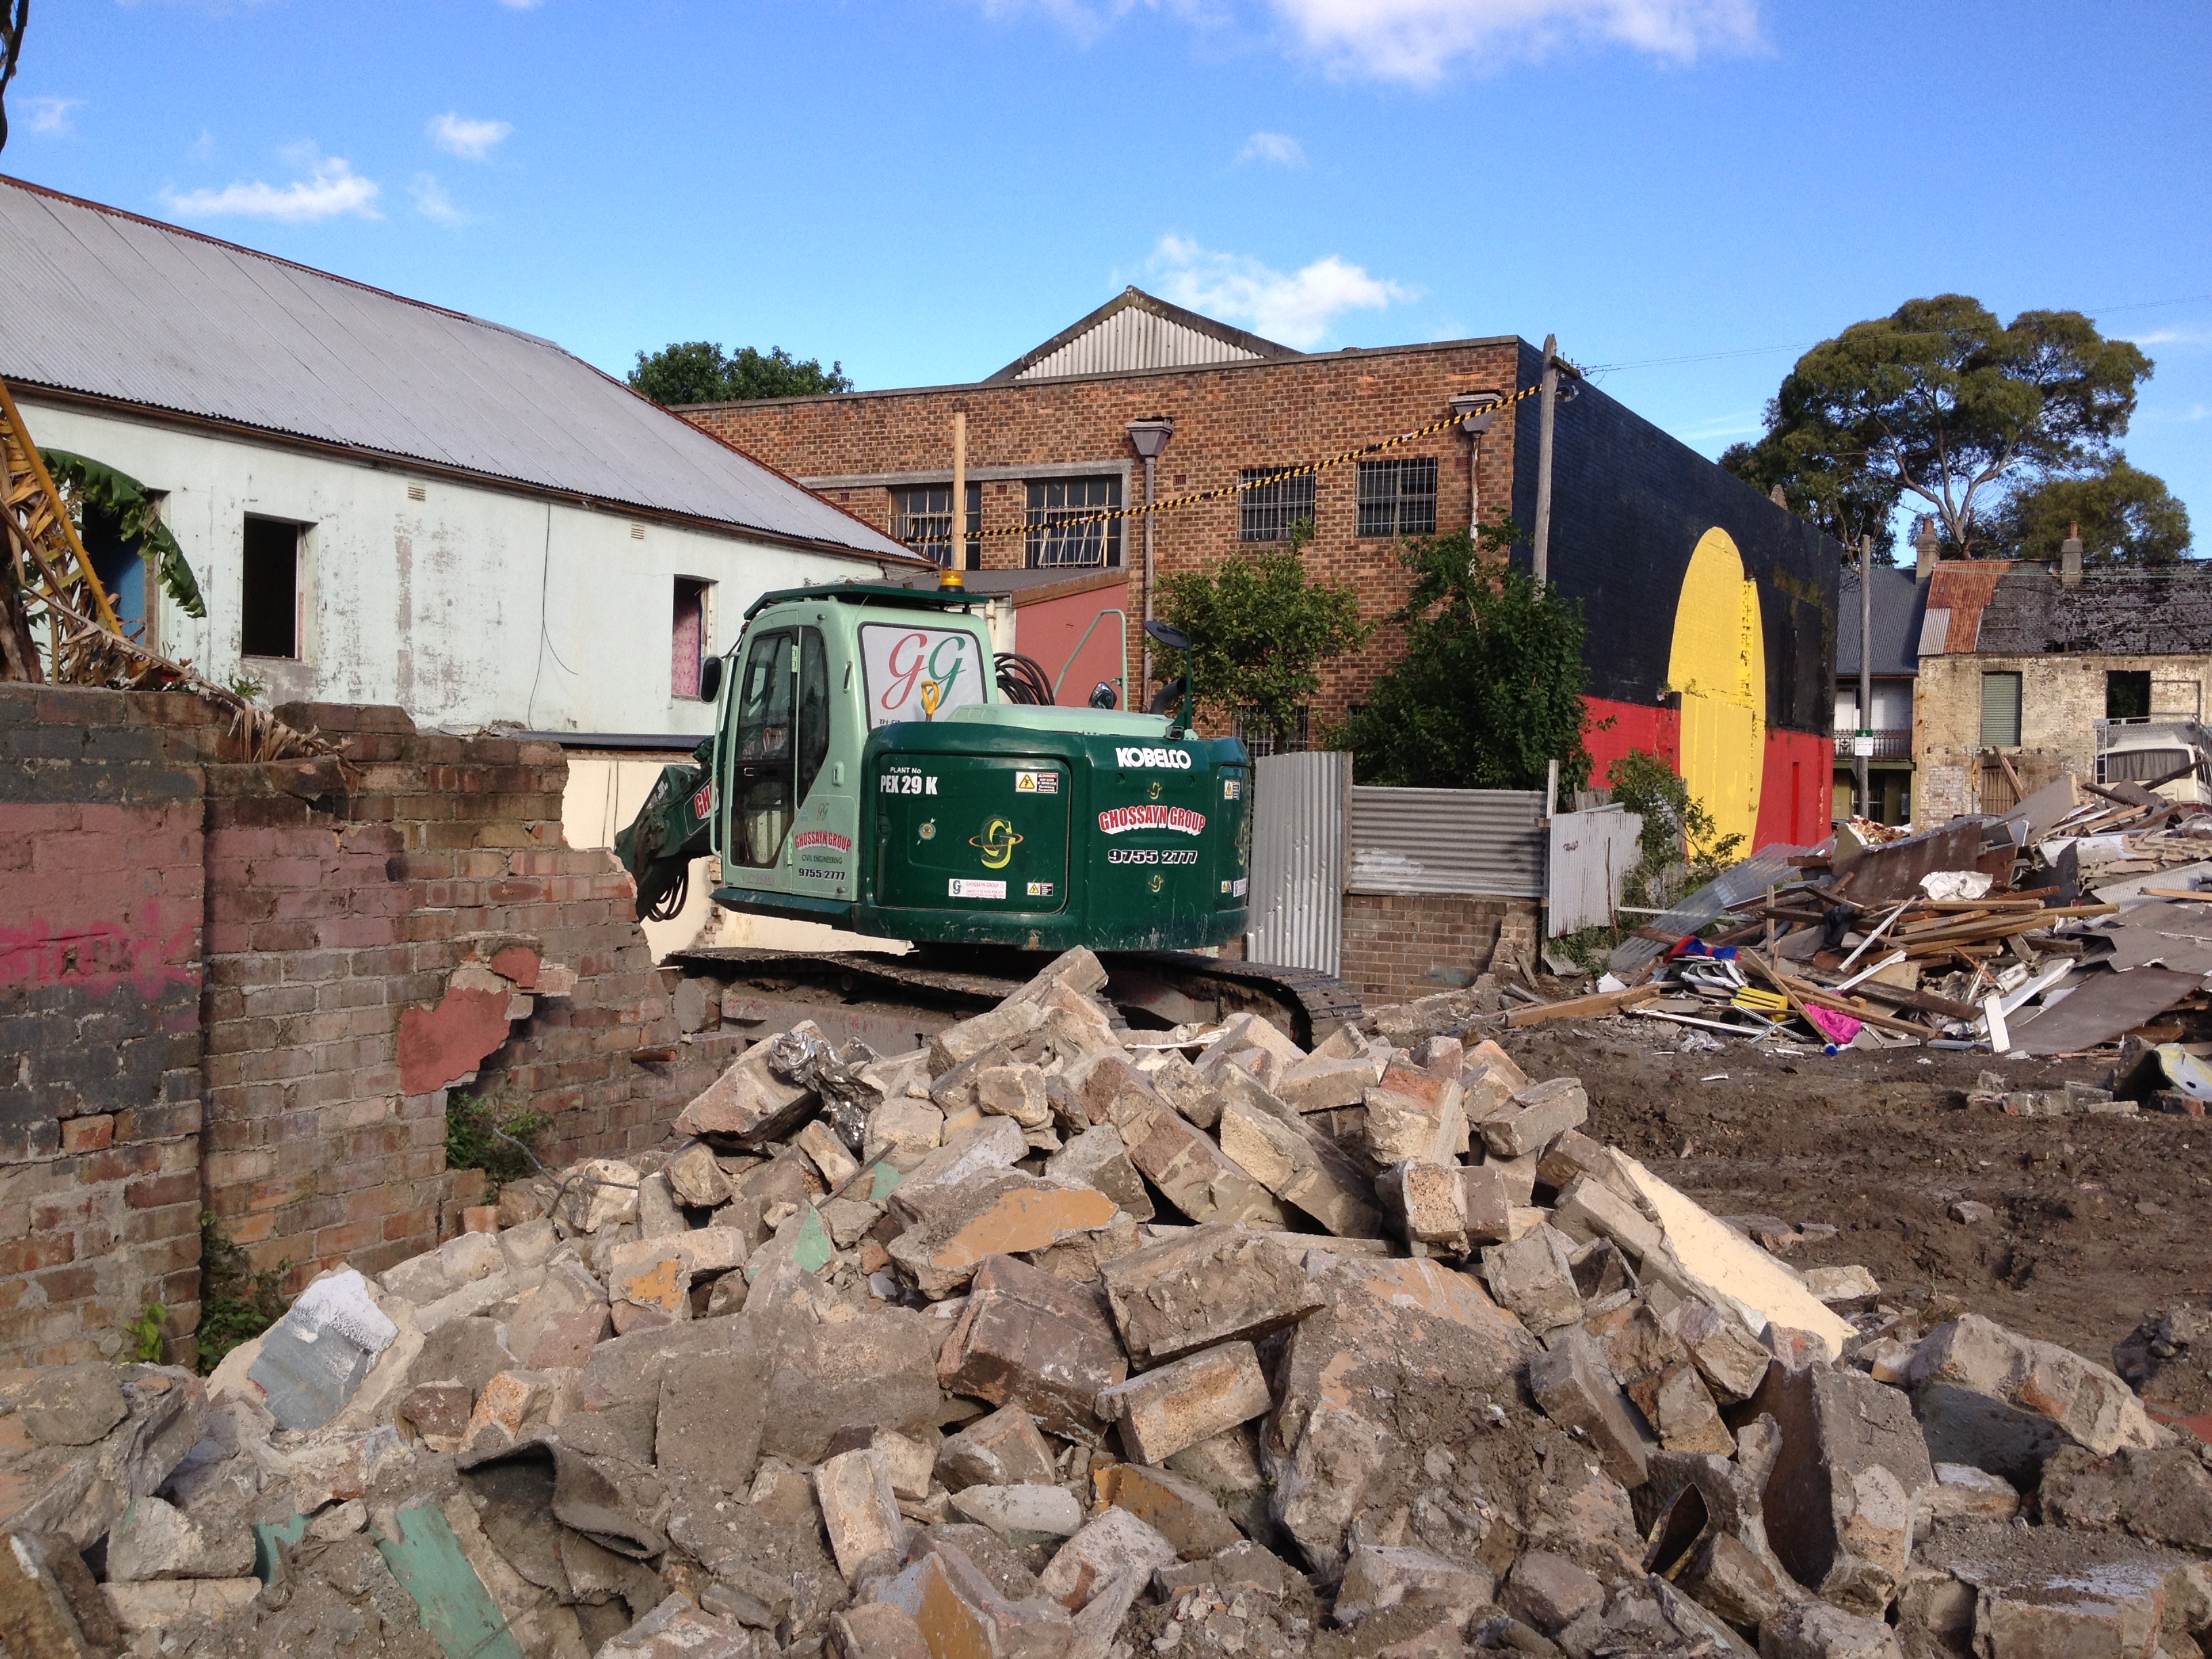 Foreground of the image is a pile of bricks and a demolition machine and in the background can see a building with the Aboriginal Flag painted on the side